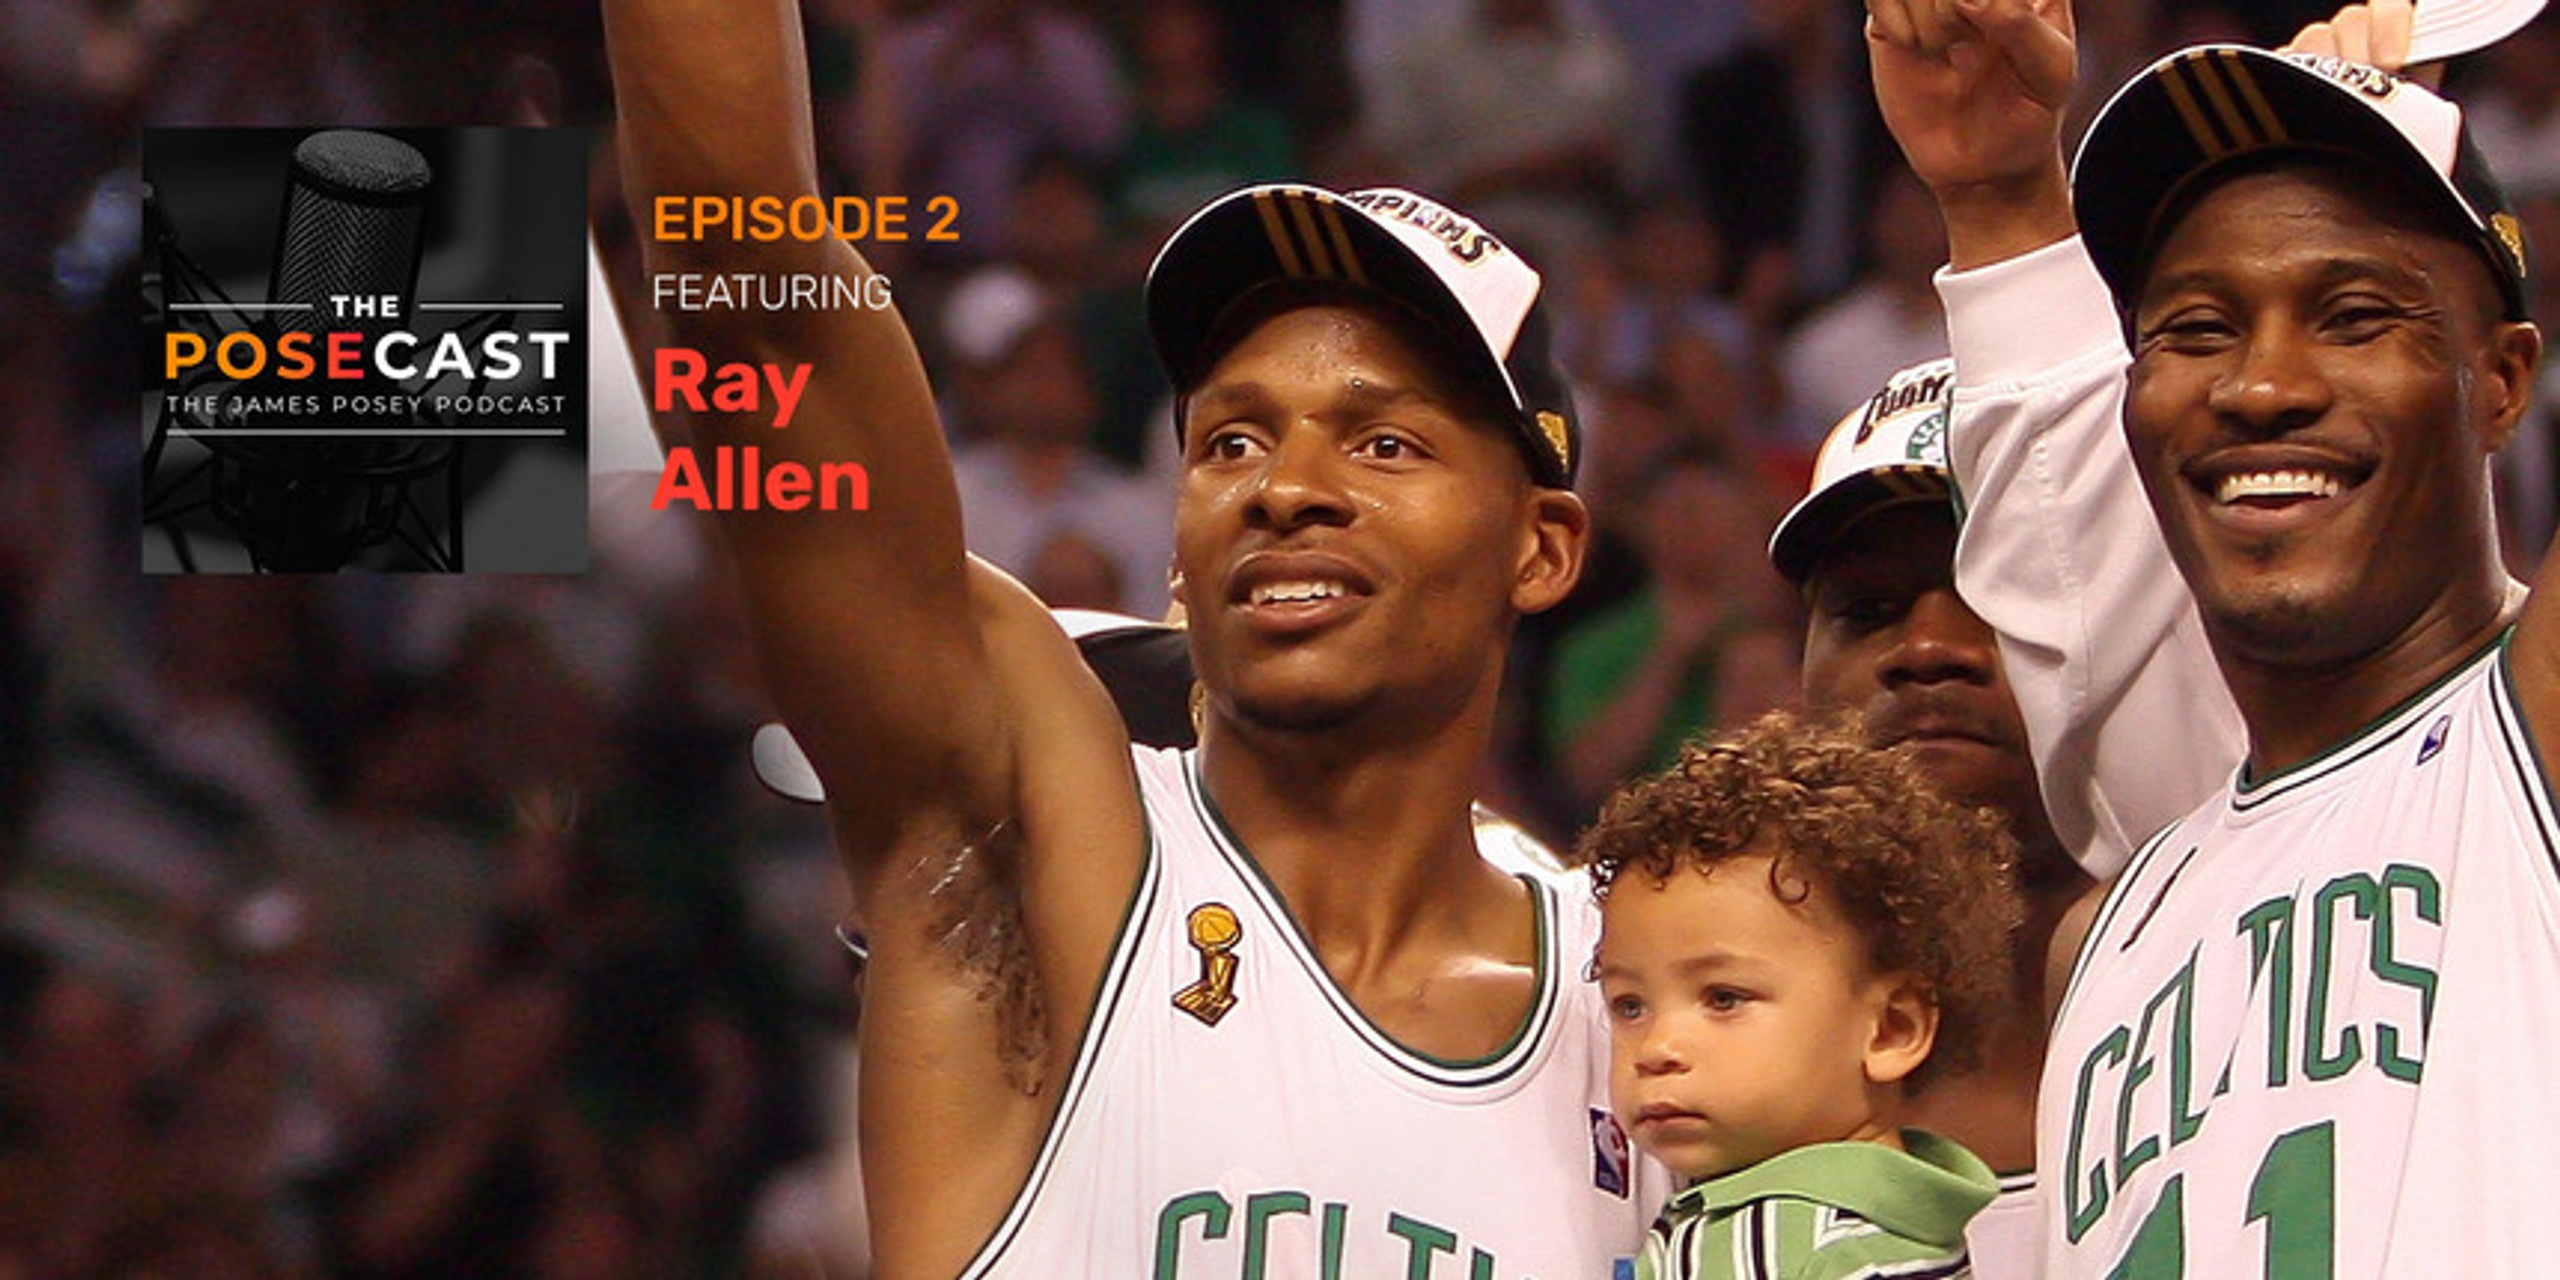 The Posecast: Ray Allen on battling Kobe, today's top shooters and more